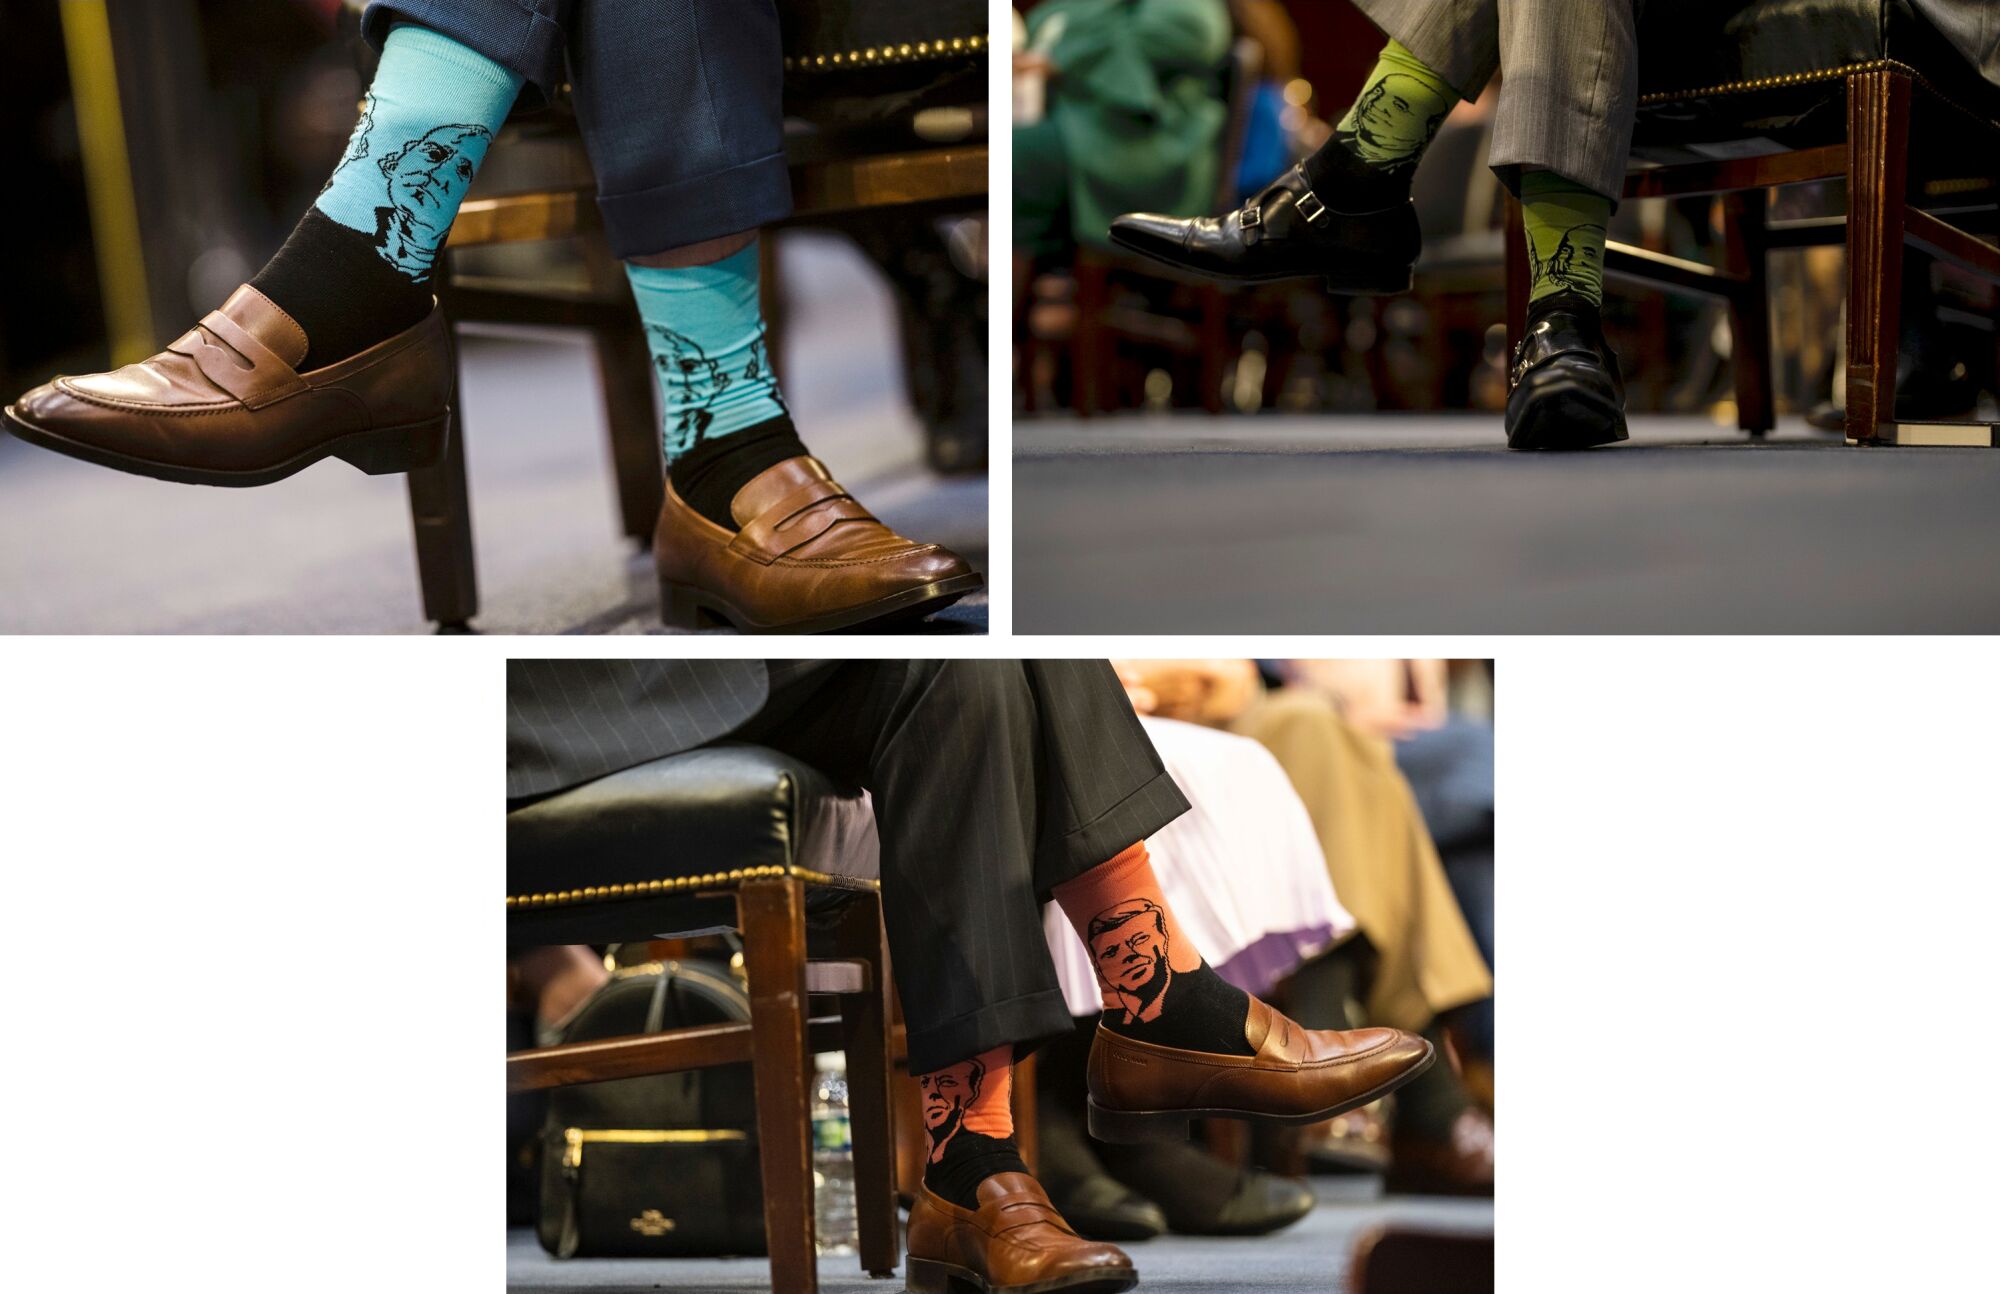 Patrick Jackson wears socks displaying the faces of prominent political figures from American history.